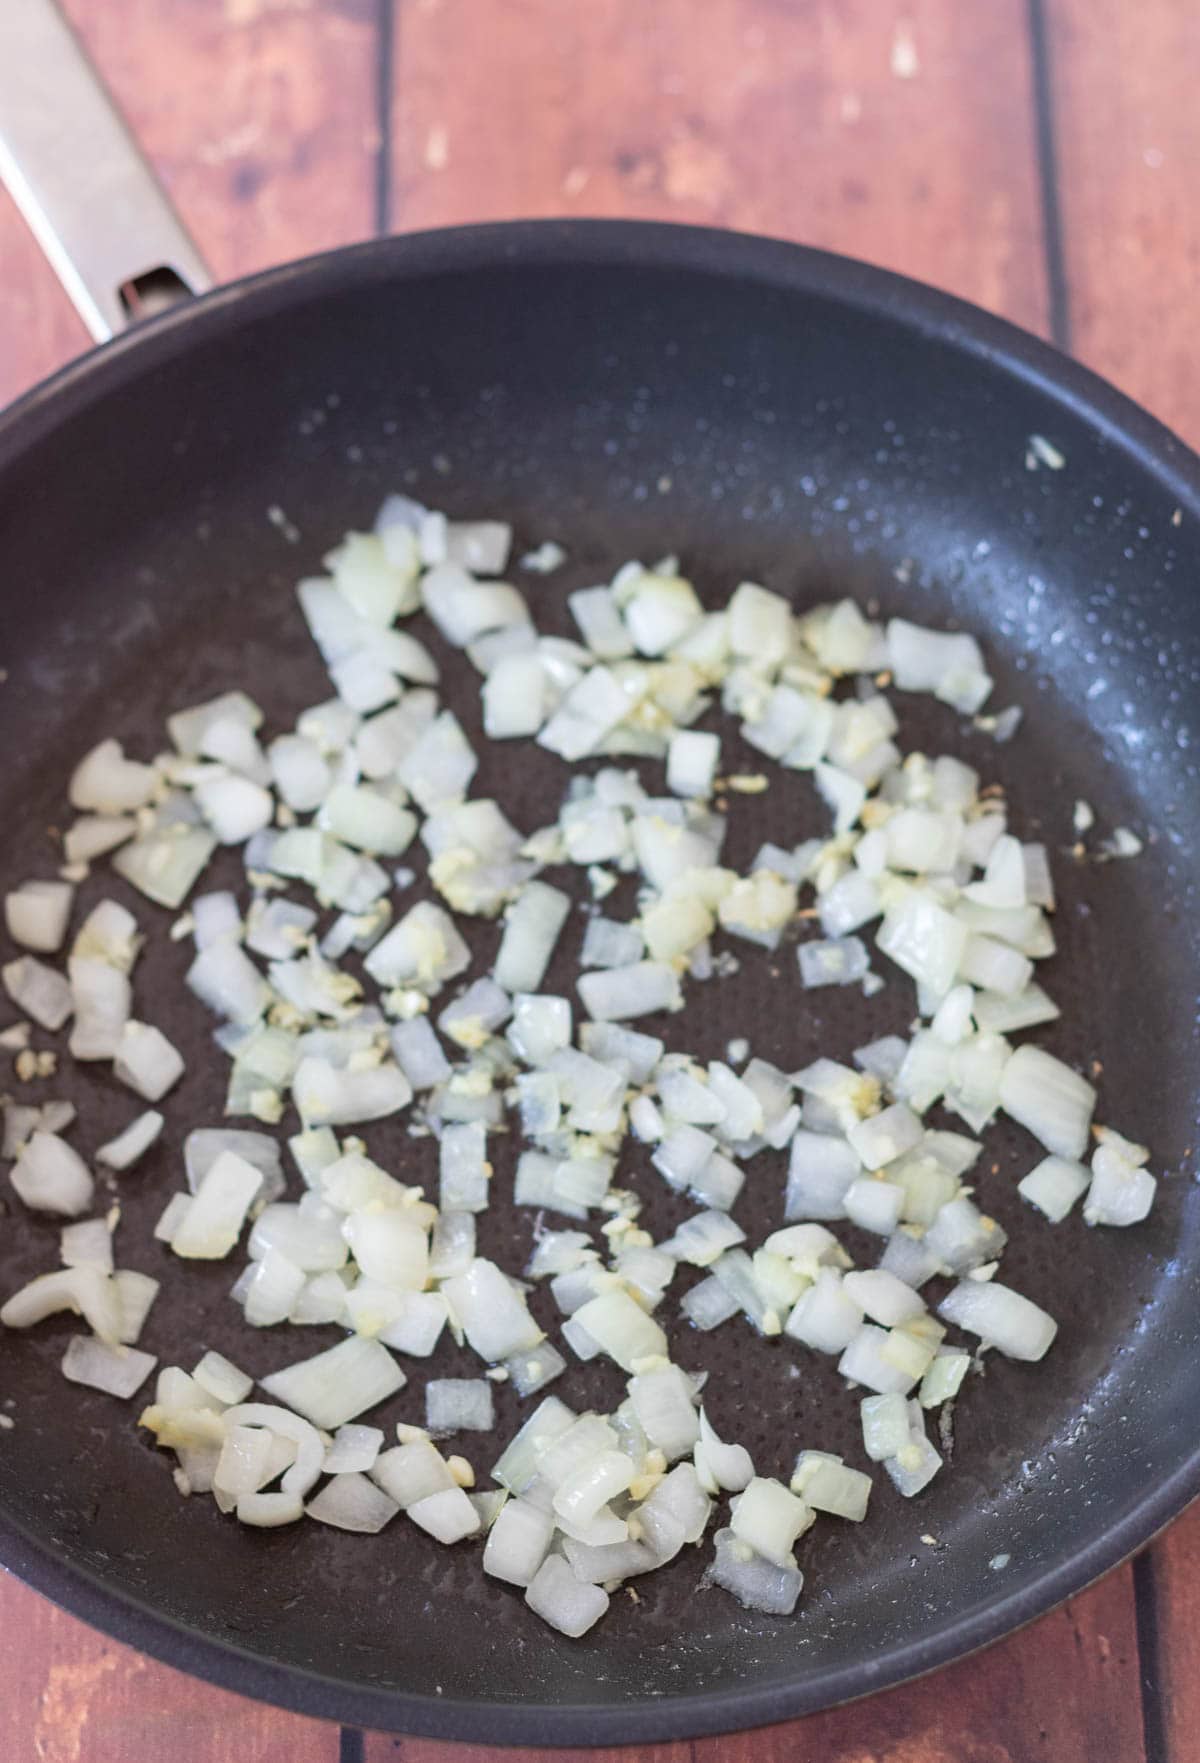 Sautéd onion and garlic in a large frying pan.